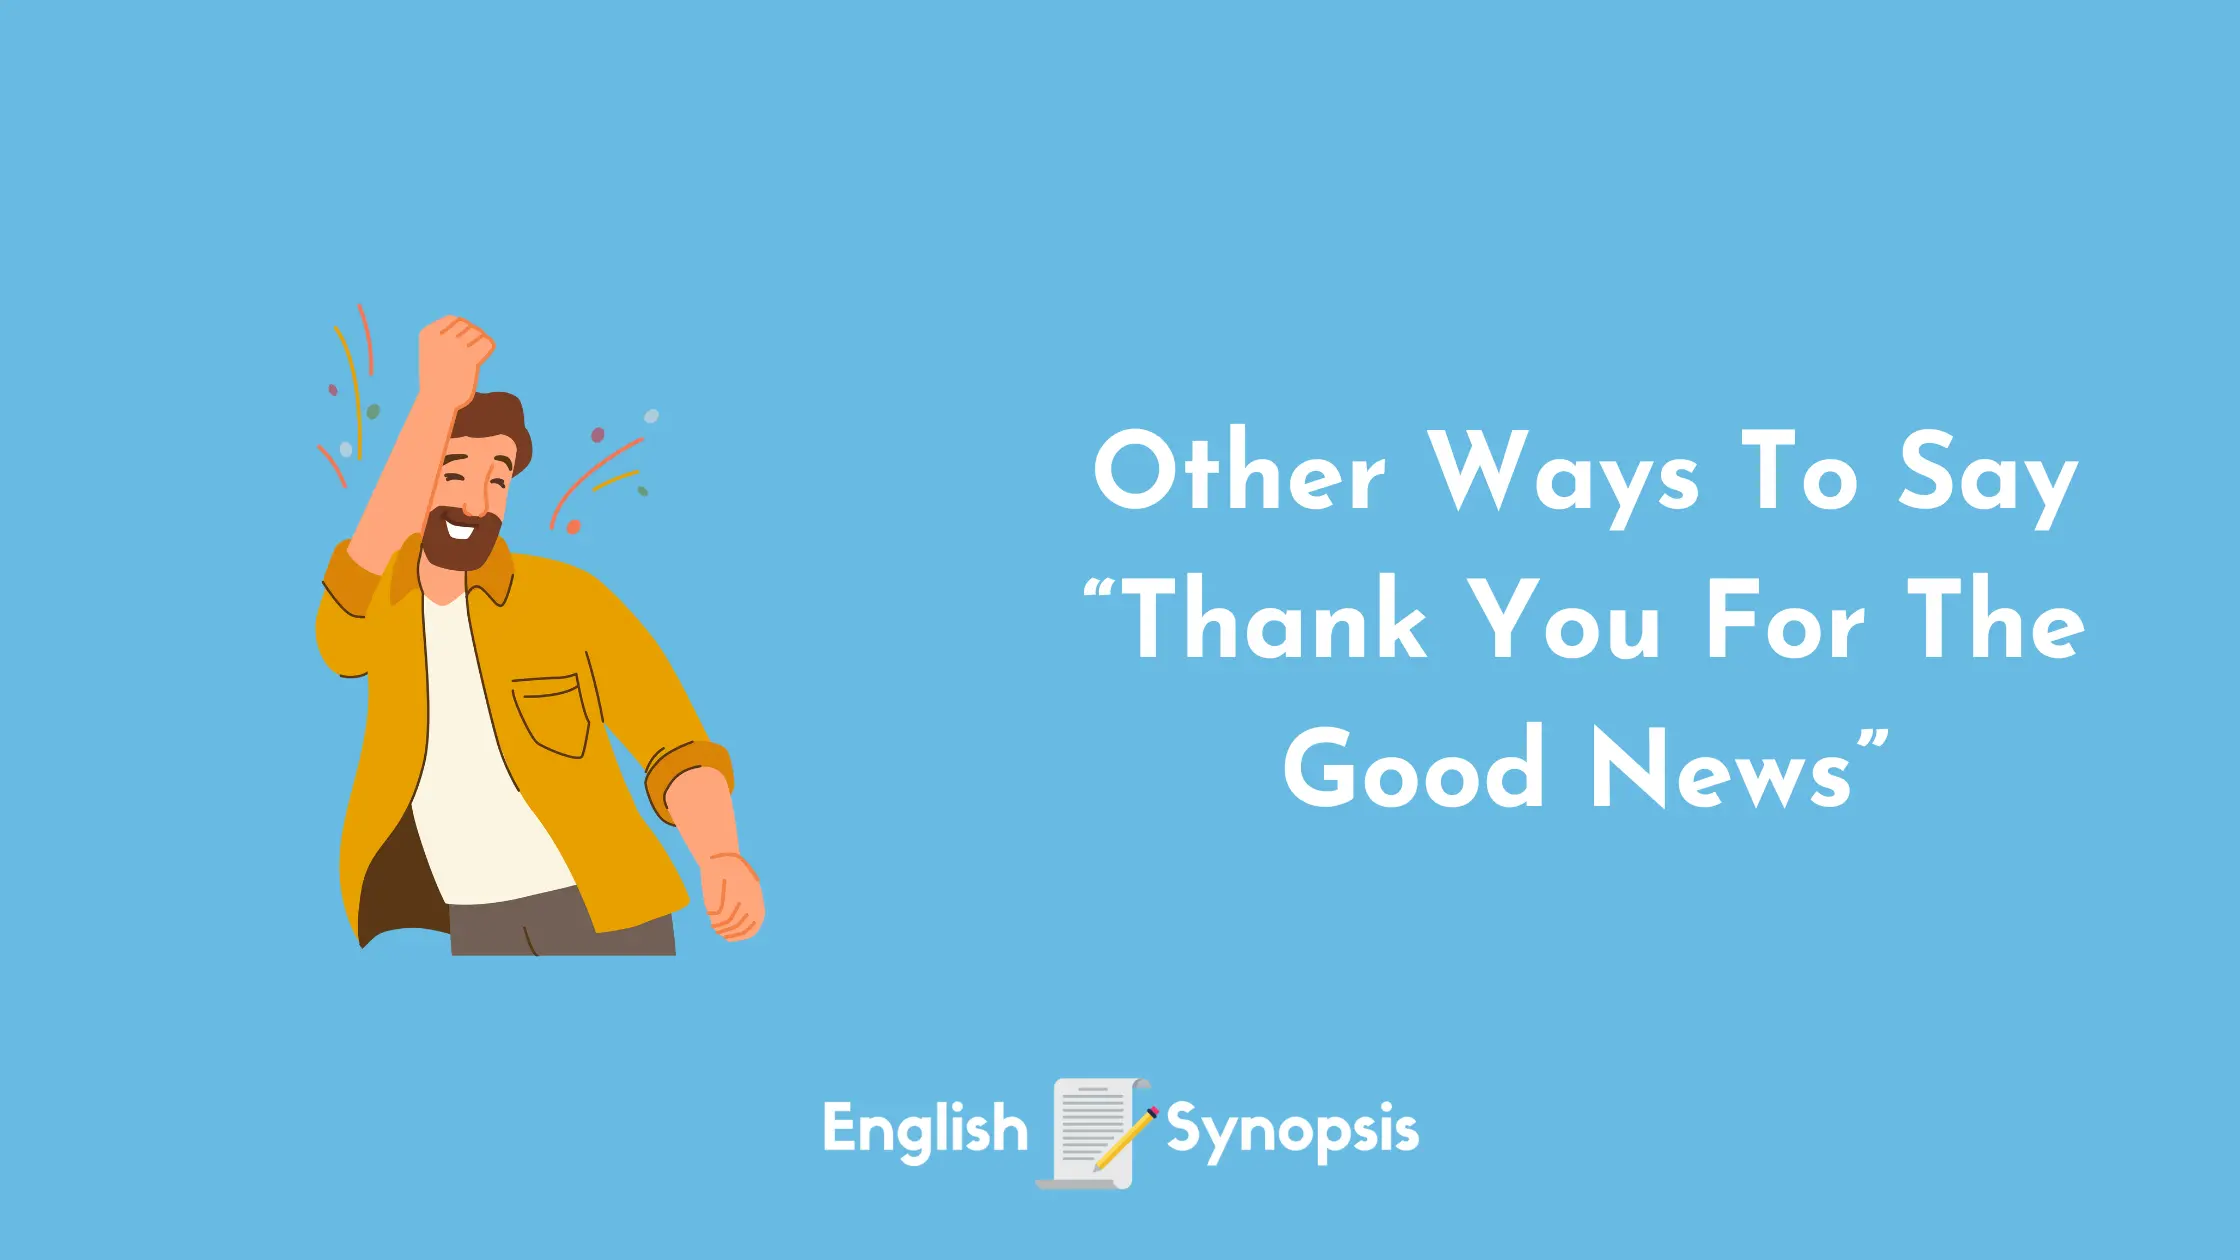 Other Ways To Say "Thank You For The Good News"